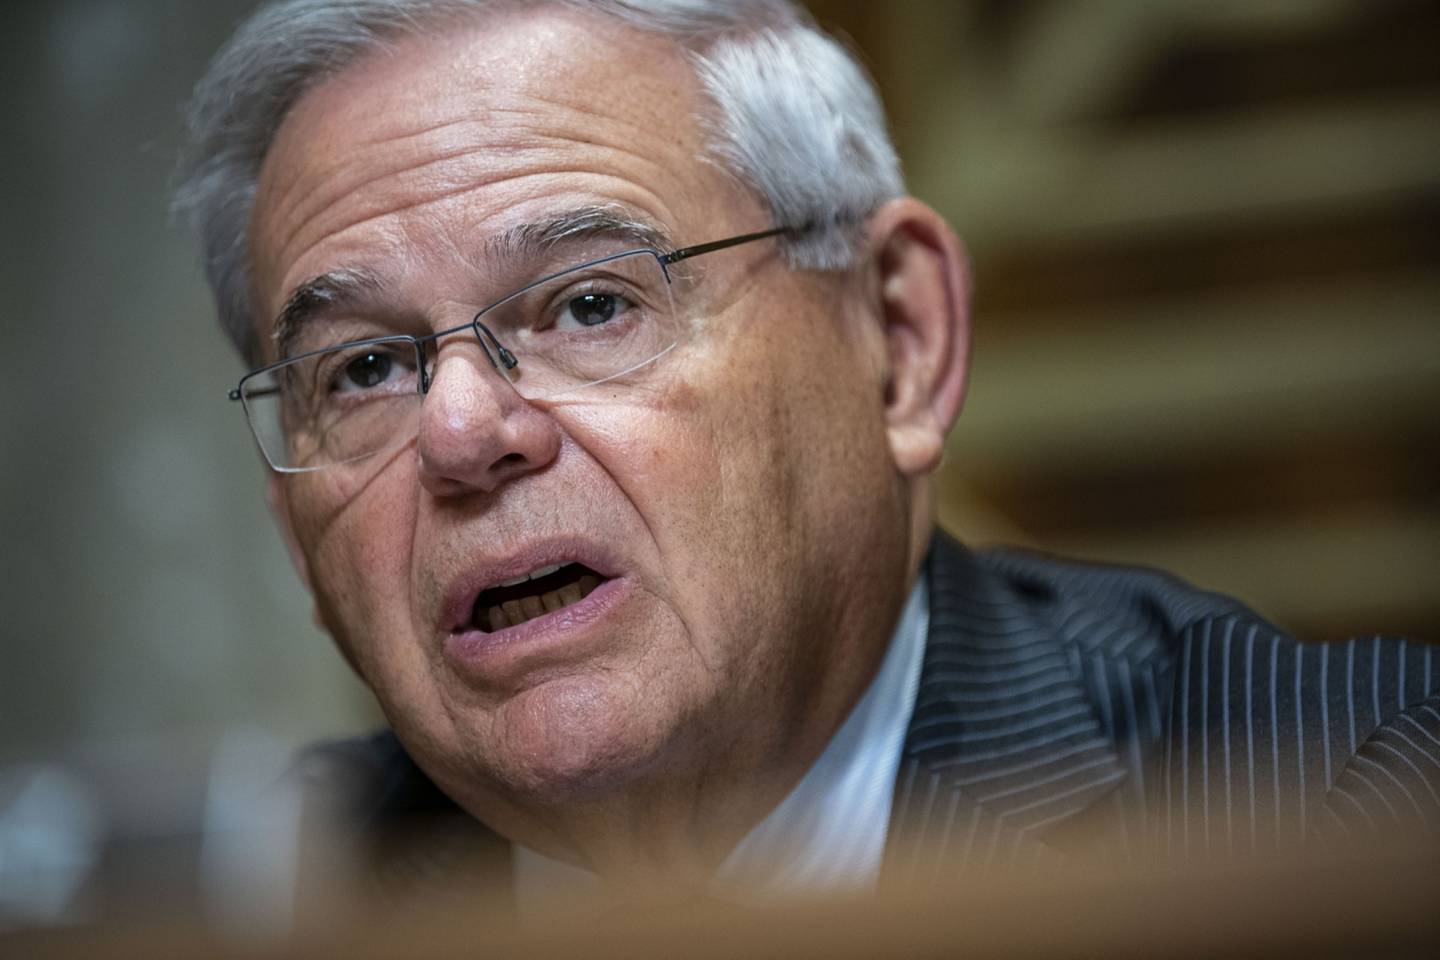 Senator Robert Menendez, a Democrat from New Jersey and chairman of the Senate Foreign Relations Committee.